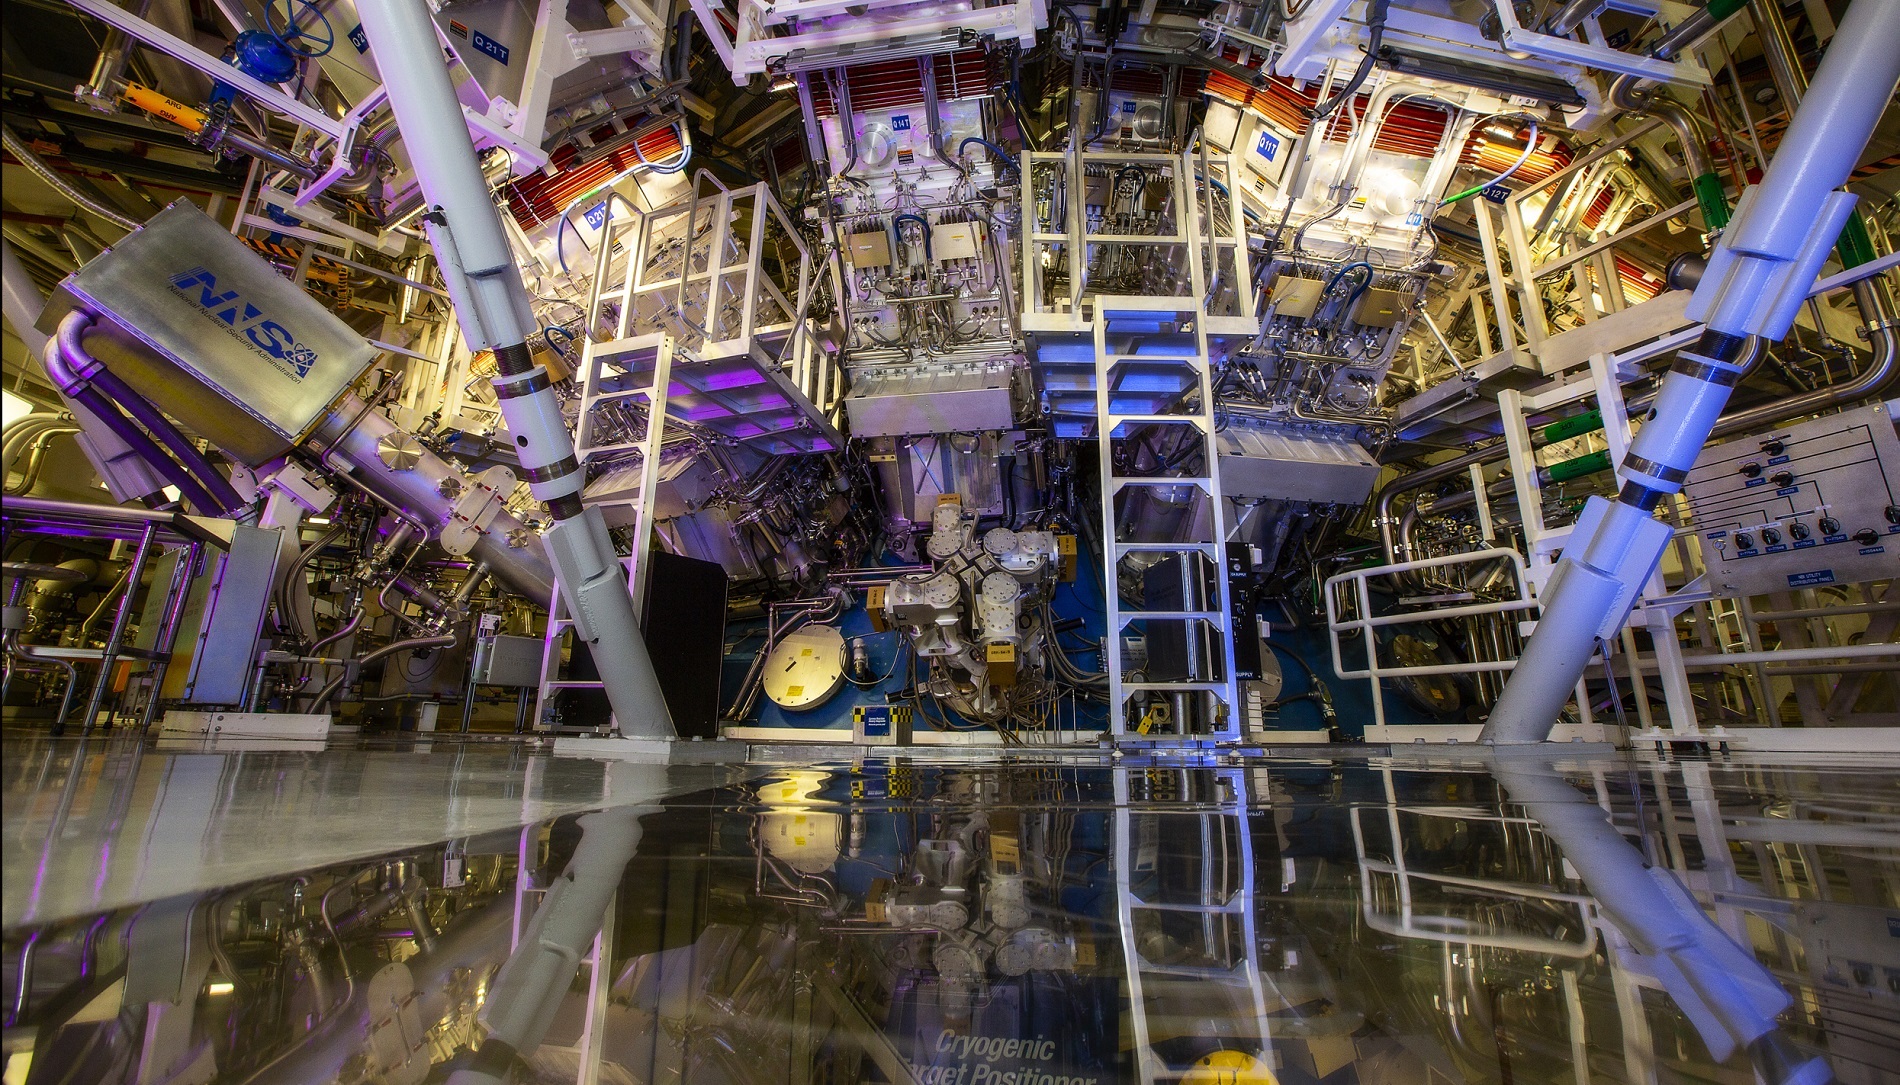 NIF’s target chamber is where the magic happens -- temperatures of 100 million degrees and pressures extreme enough to compress the target to densities up to 100 times that of lead are created there